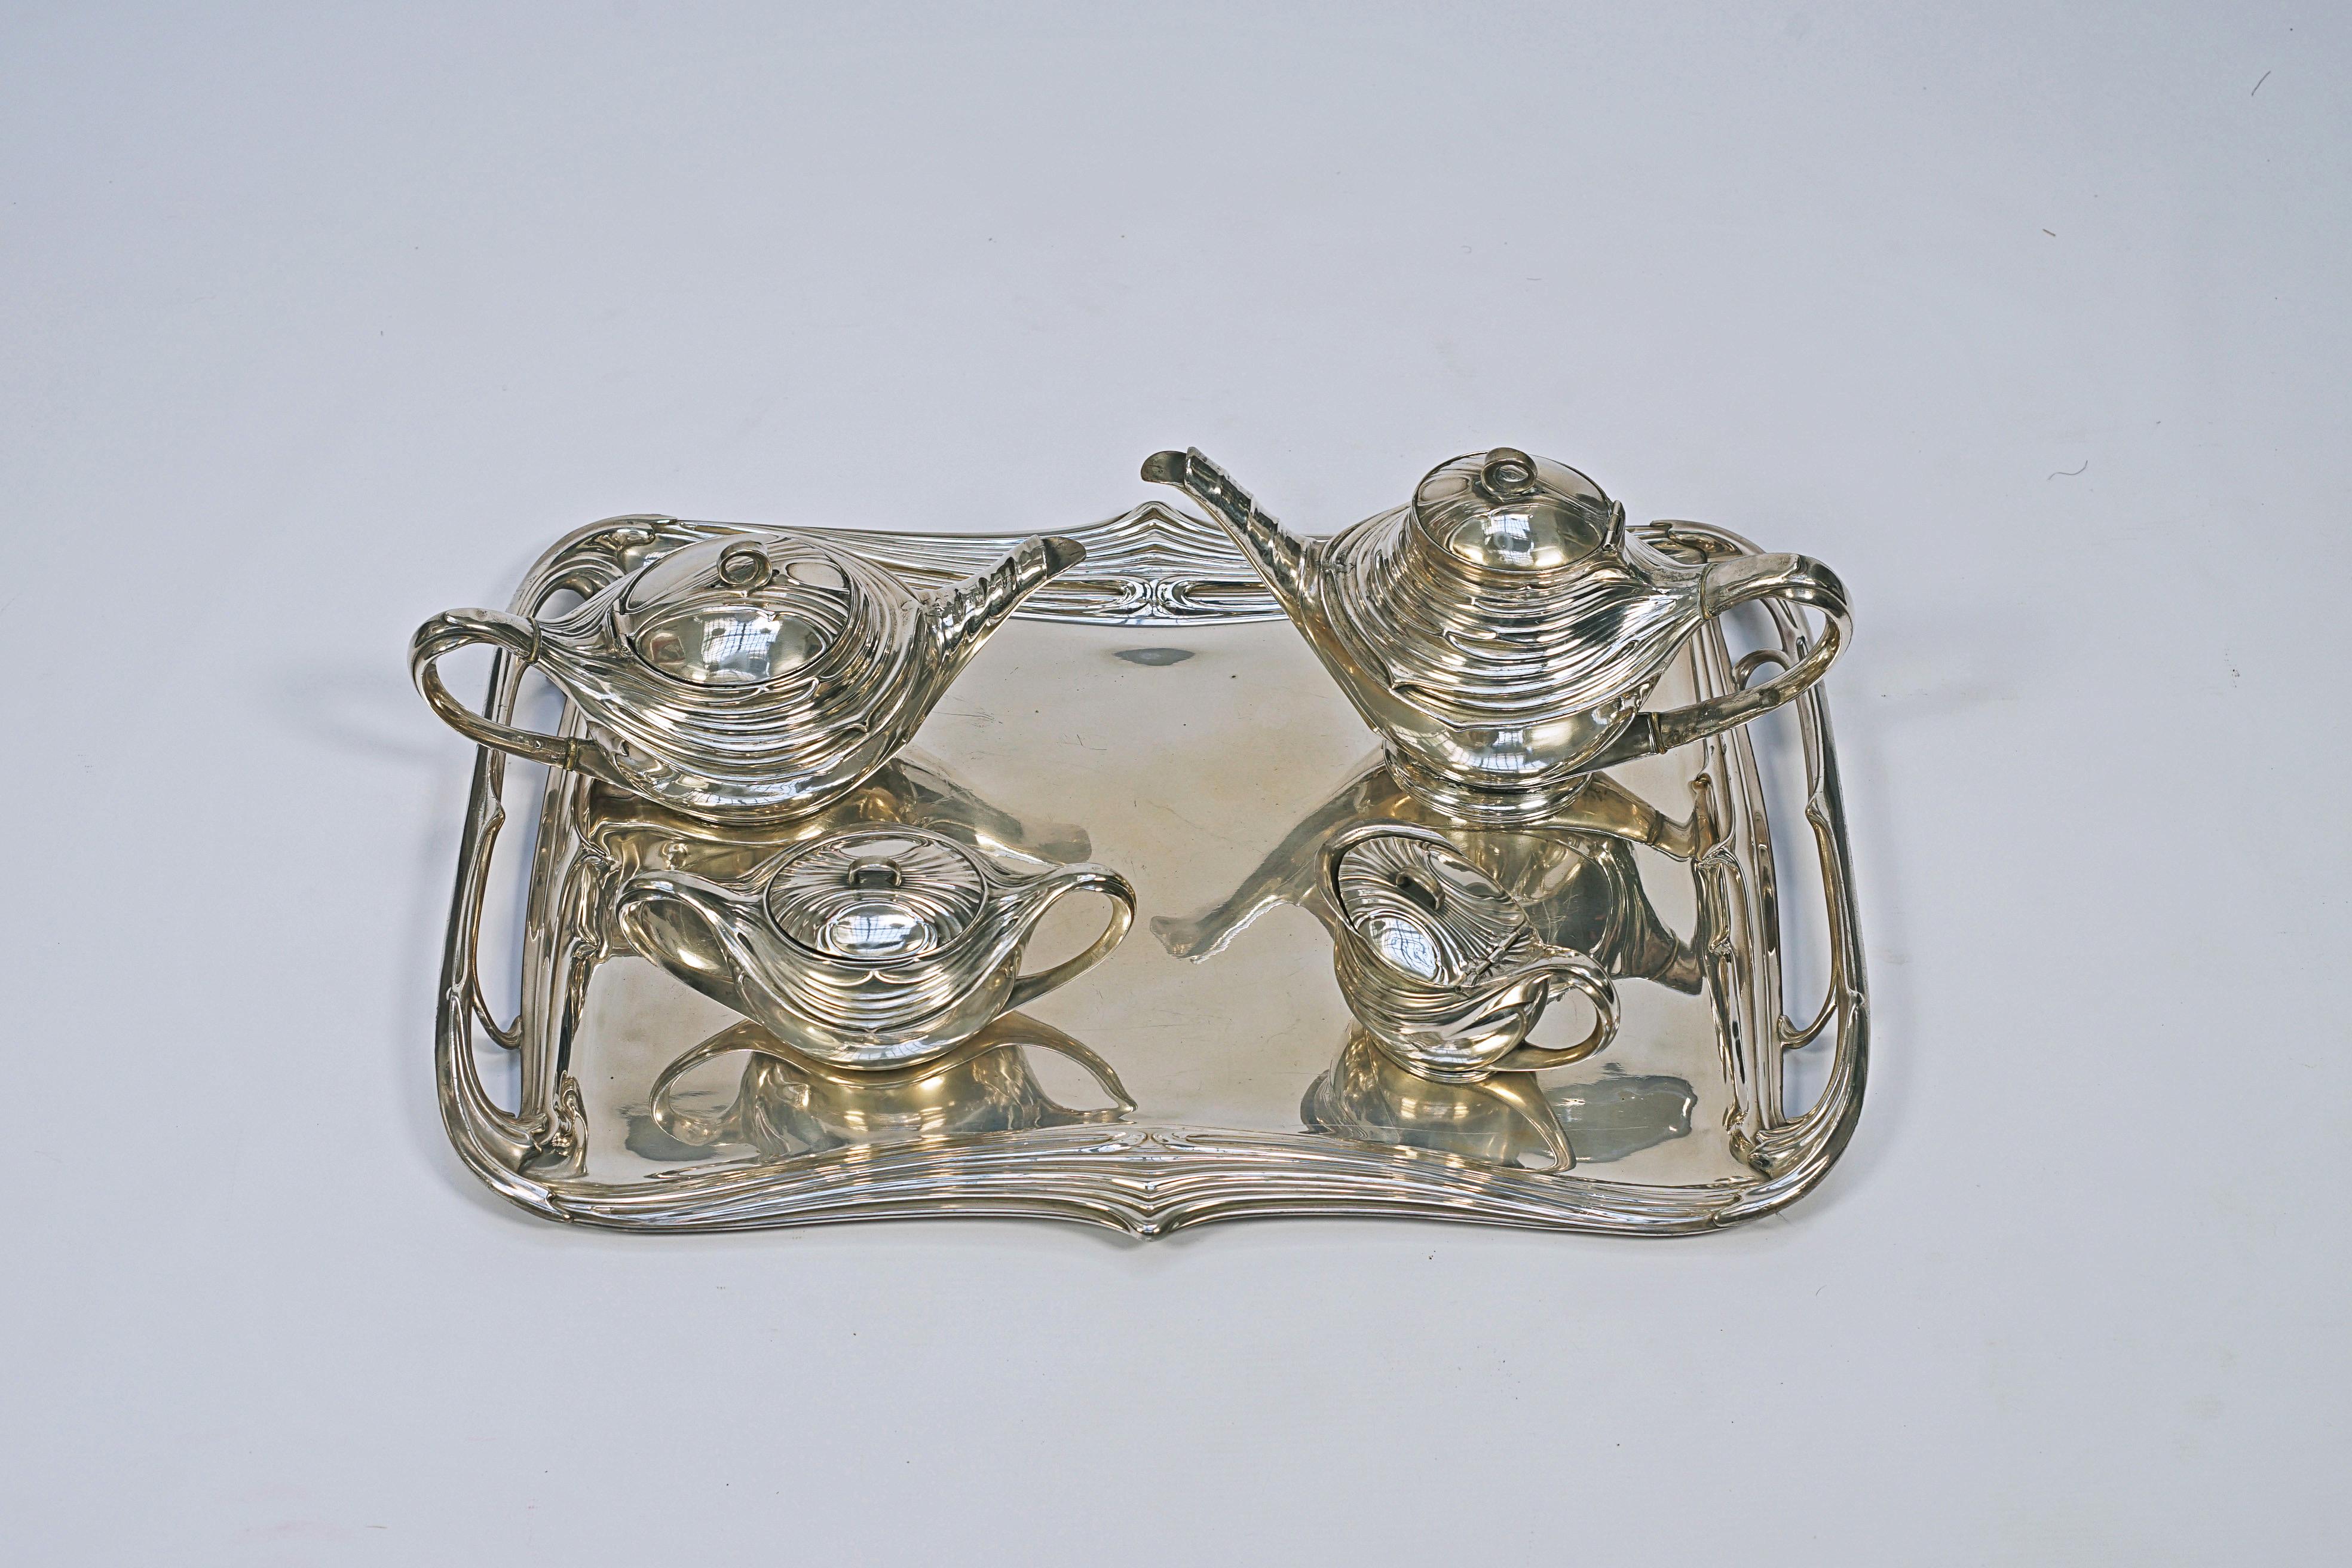 Silver-plated bronze tea and coffee set, 5 pieces, model 149. Made by the WMF-Württembergische Metallwarenfabrik (1853 to the present).

“Art Nouveau Domestic Metalwork, from Wurttembergische Mettalwsarenfabrick” (1906), Graham Dry. P -